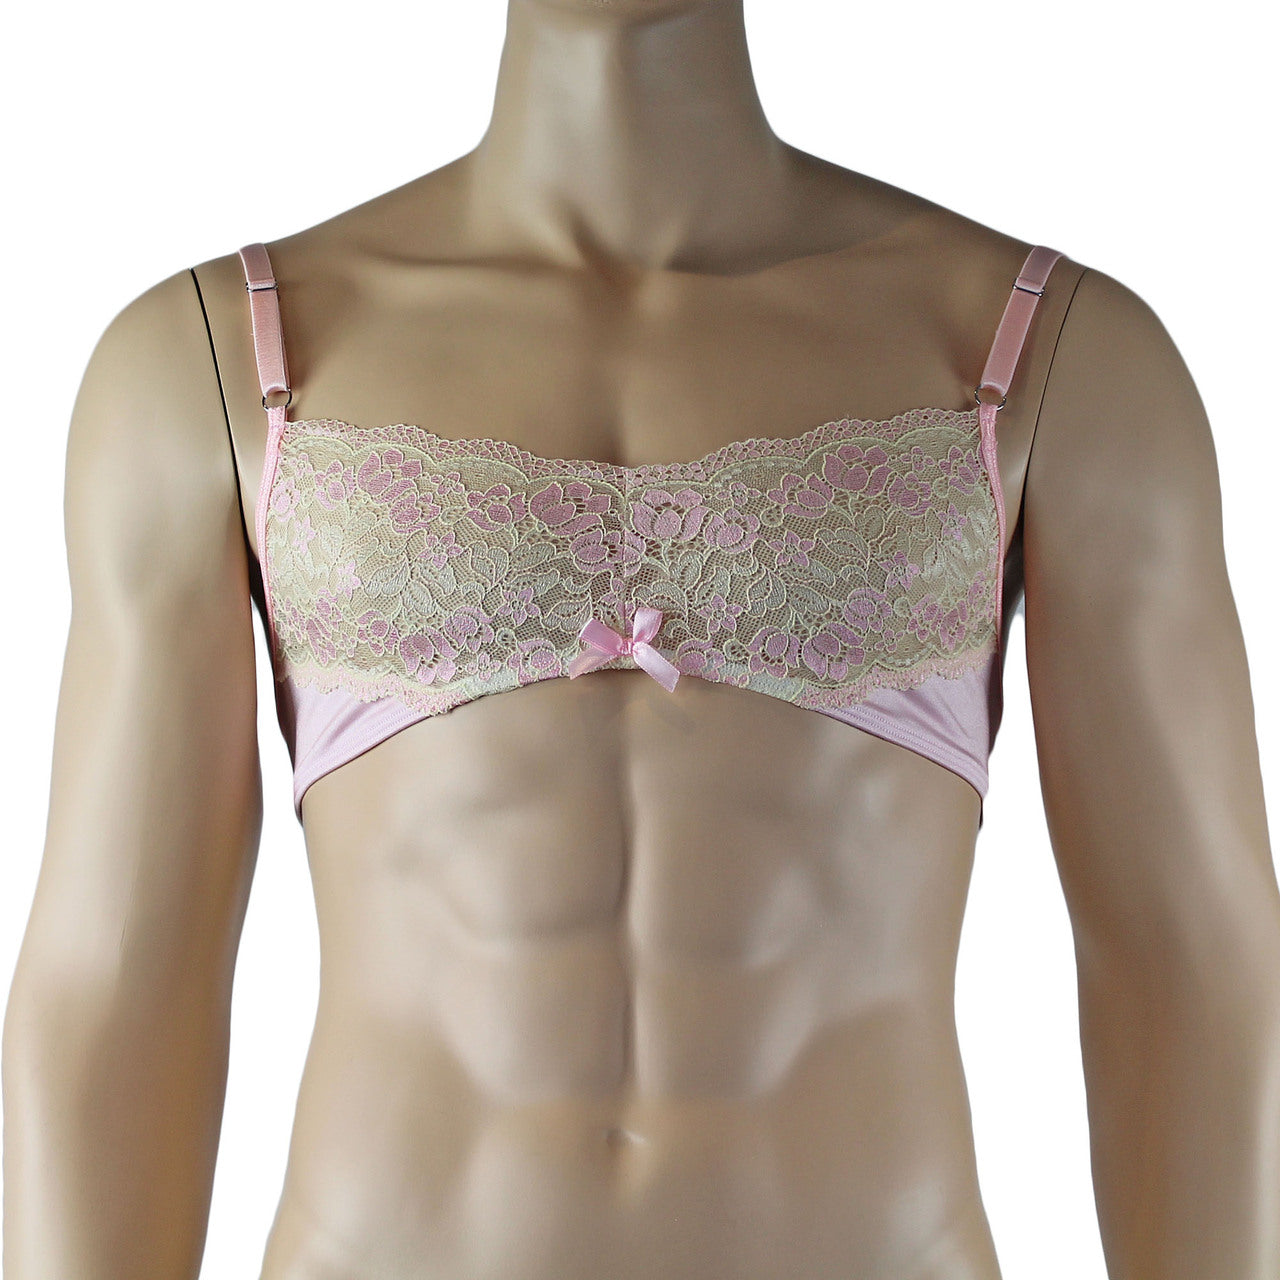 Mens Luxury Bra Top with Beautiful Lace Male Lingerie Pink